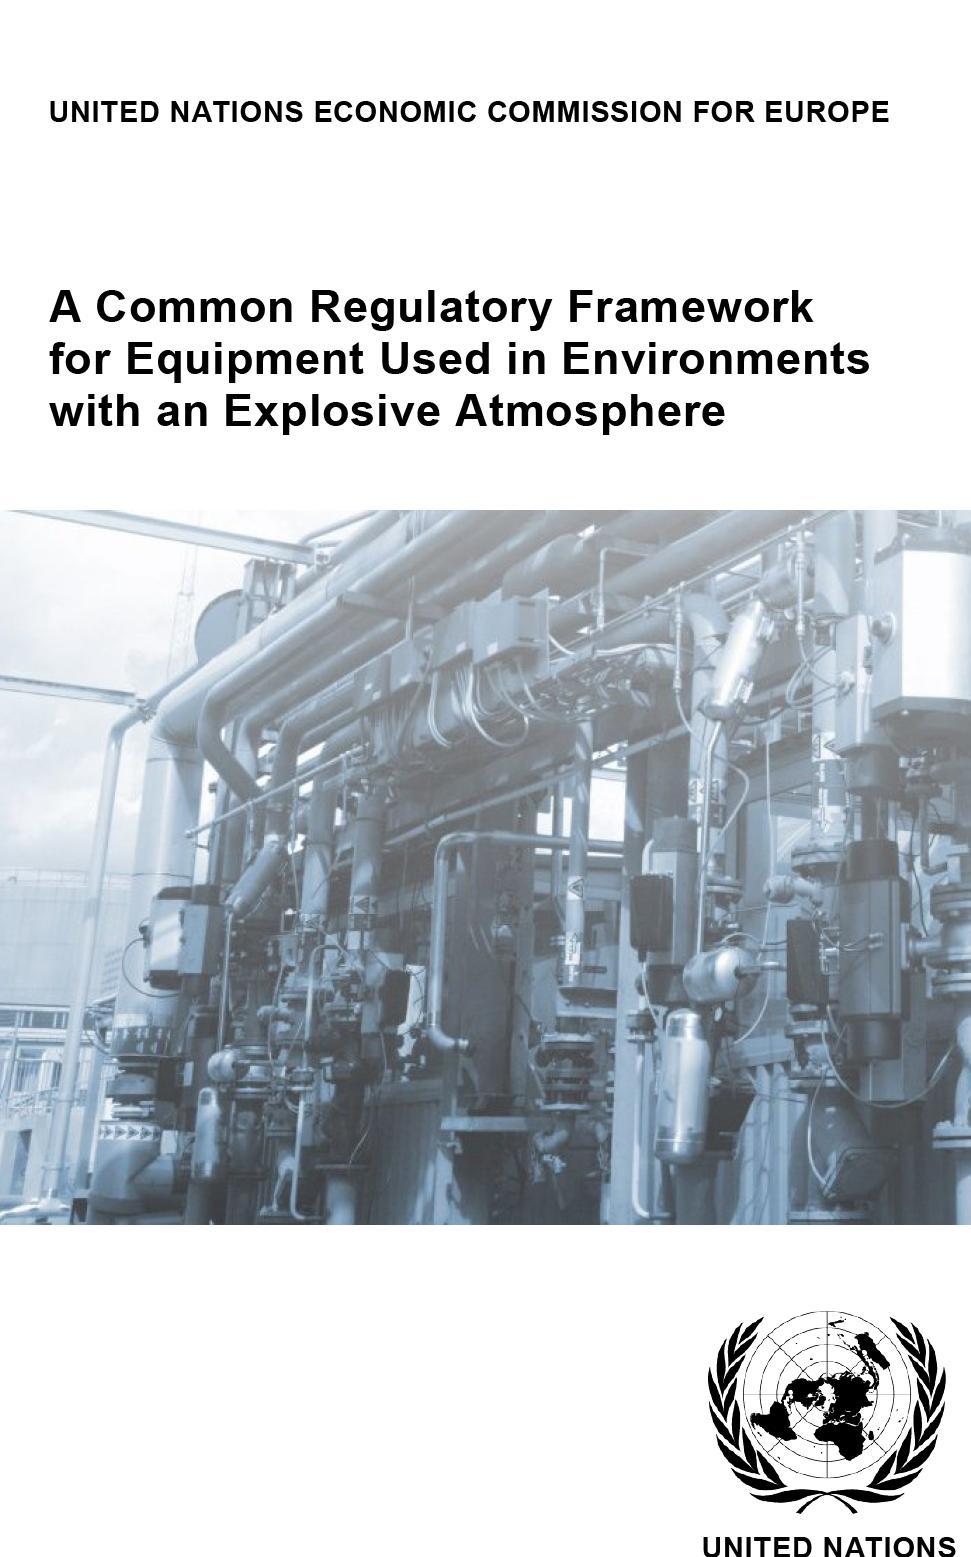 Equipment used on off-shore facilities, mines, factories - recent accidents worldwide; Need for a broad cooperation between governments, enforcement bodies, business;